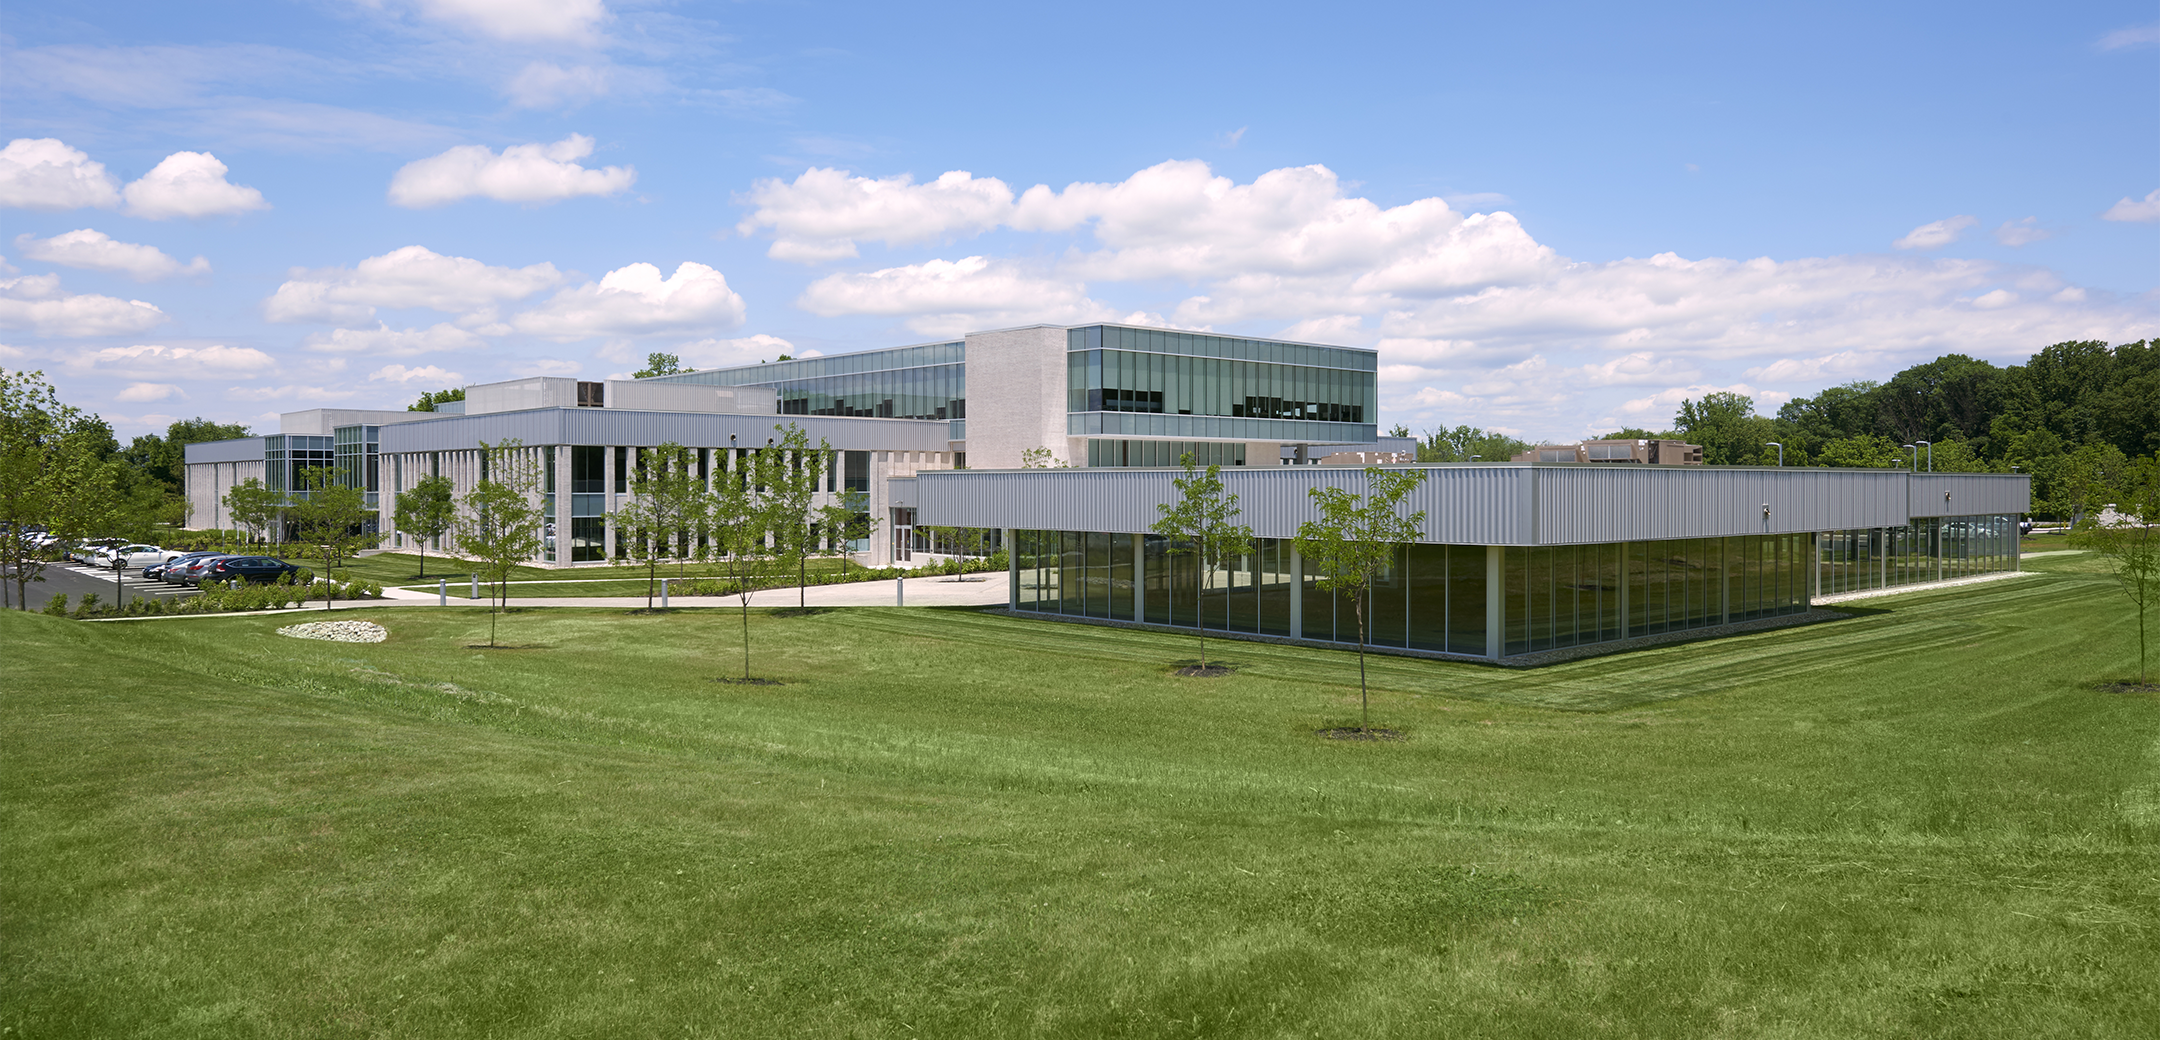 An angled view of the back of Arborcrest Corporate Campus featuring a two story, modern, office building with full-height glass cladding and landscaping in the front.